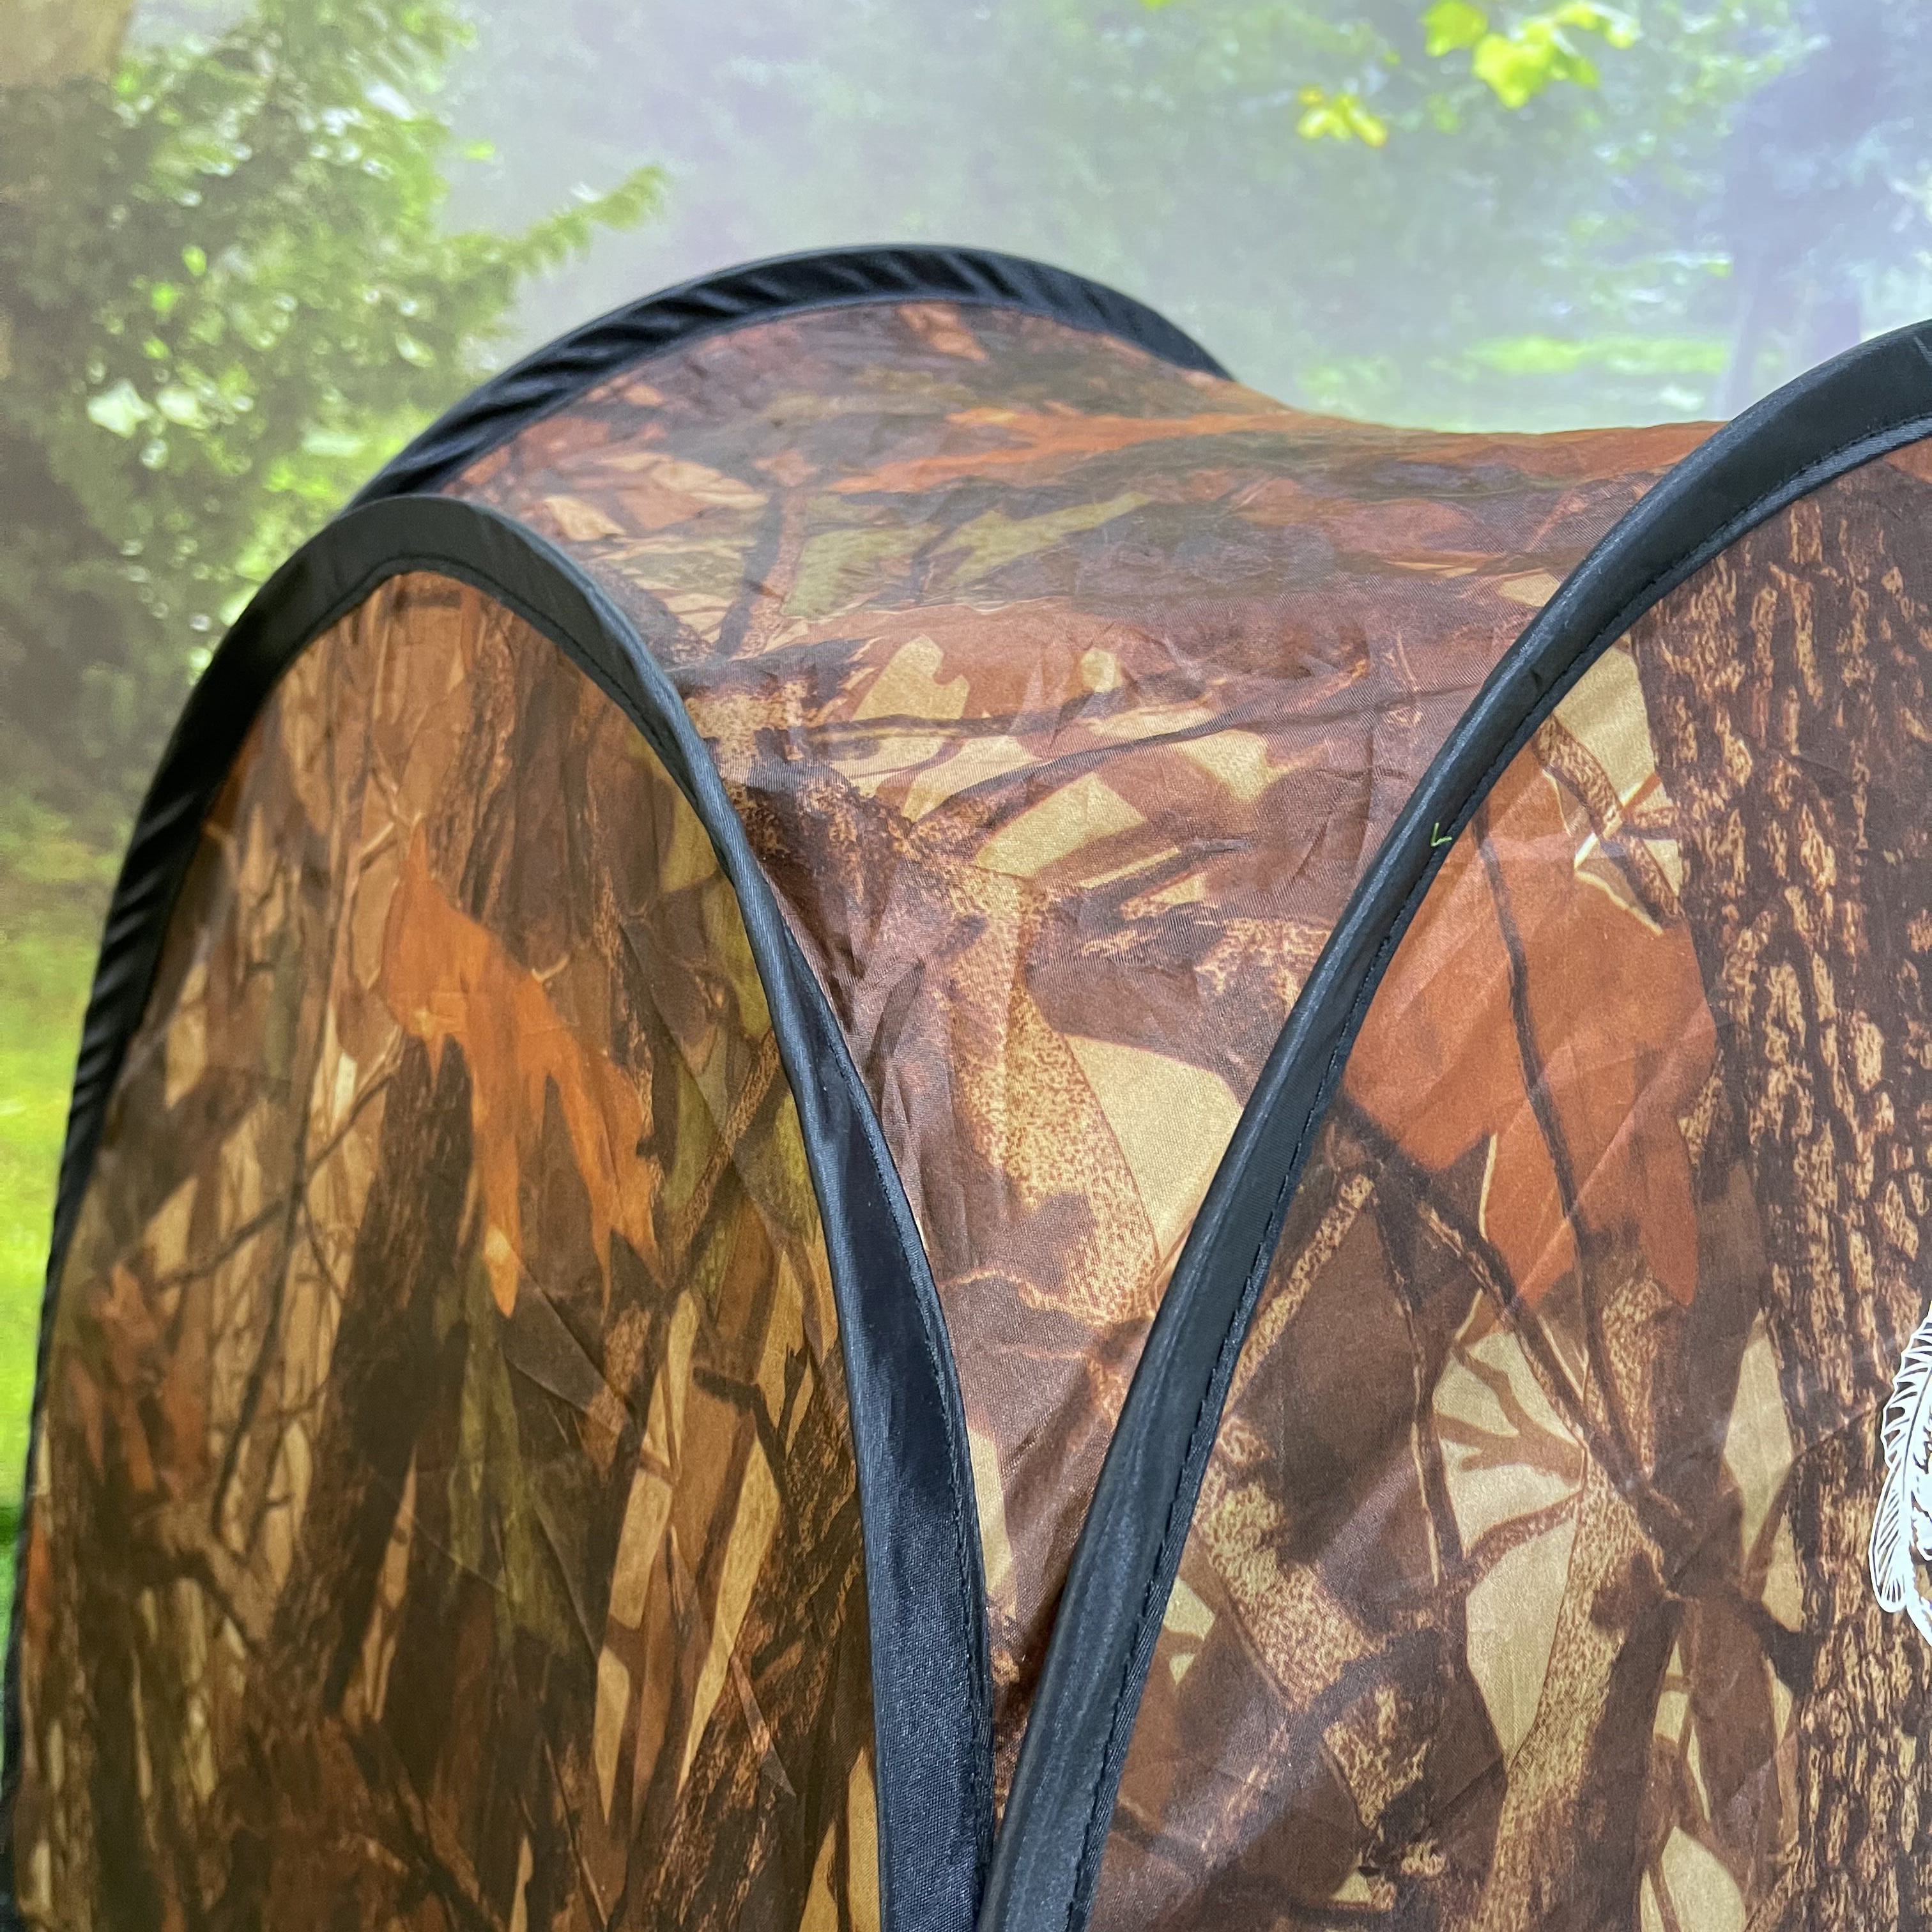 High Quality Outdoor Hunter Camouflage Blind Easy Fold-up And Open Kids Toy Children Play Tent